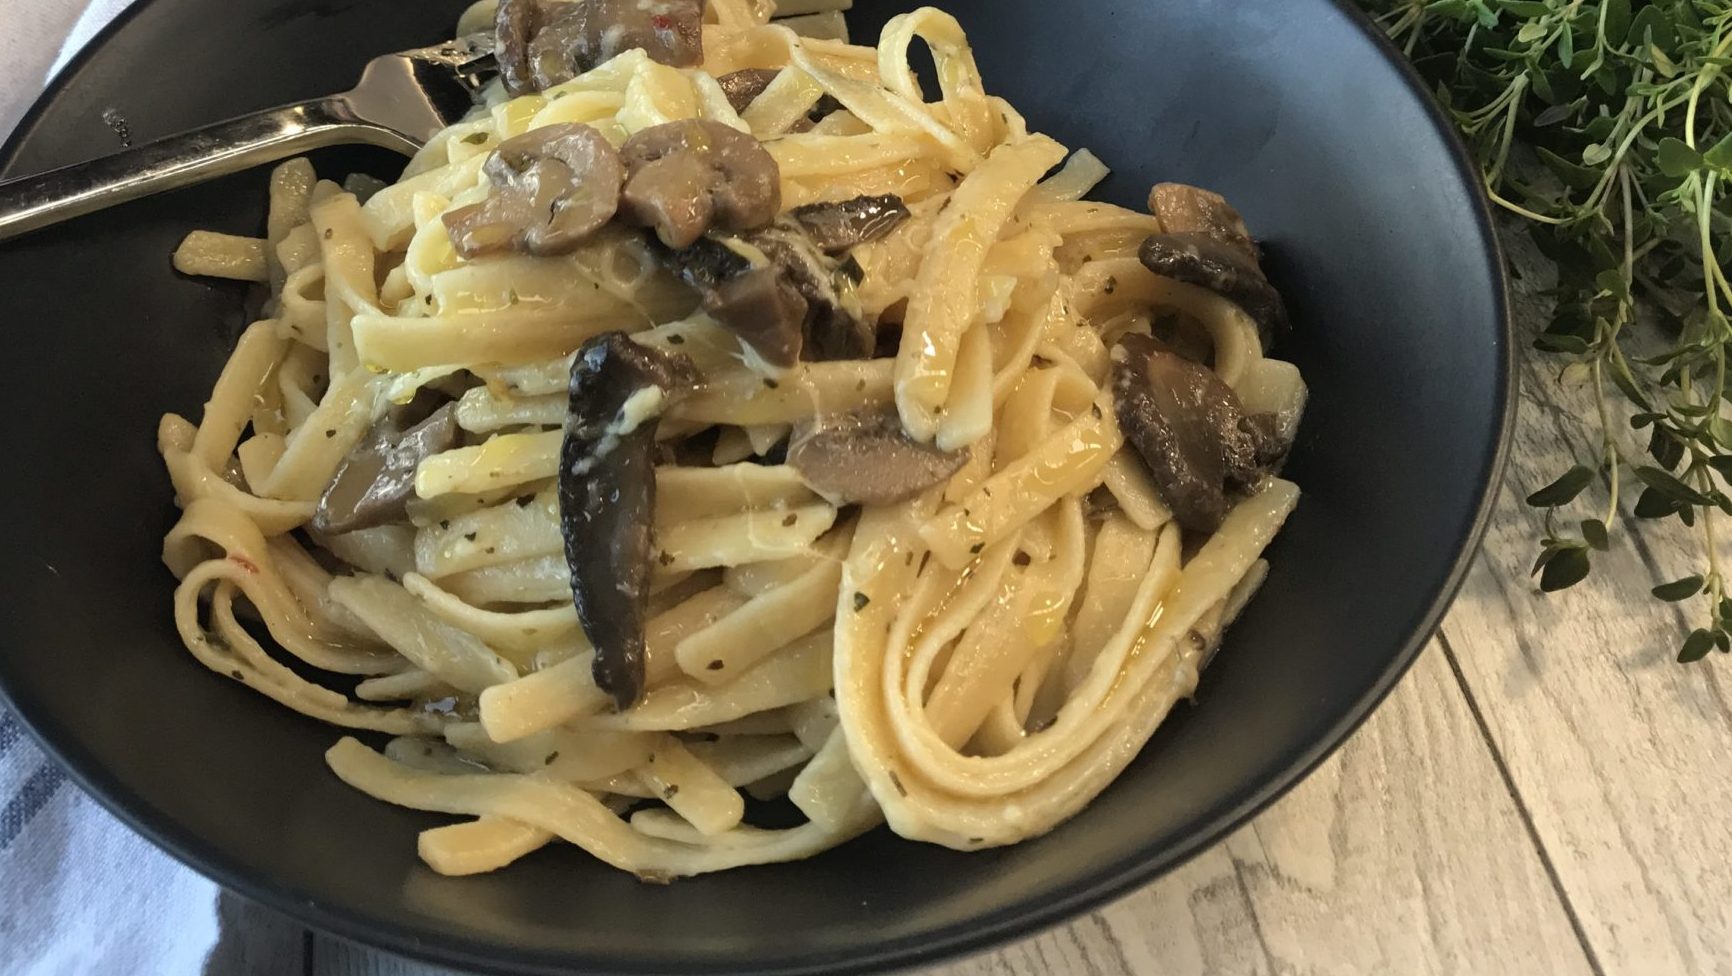 A bowl of pasta topped with mushrooms.